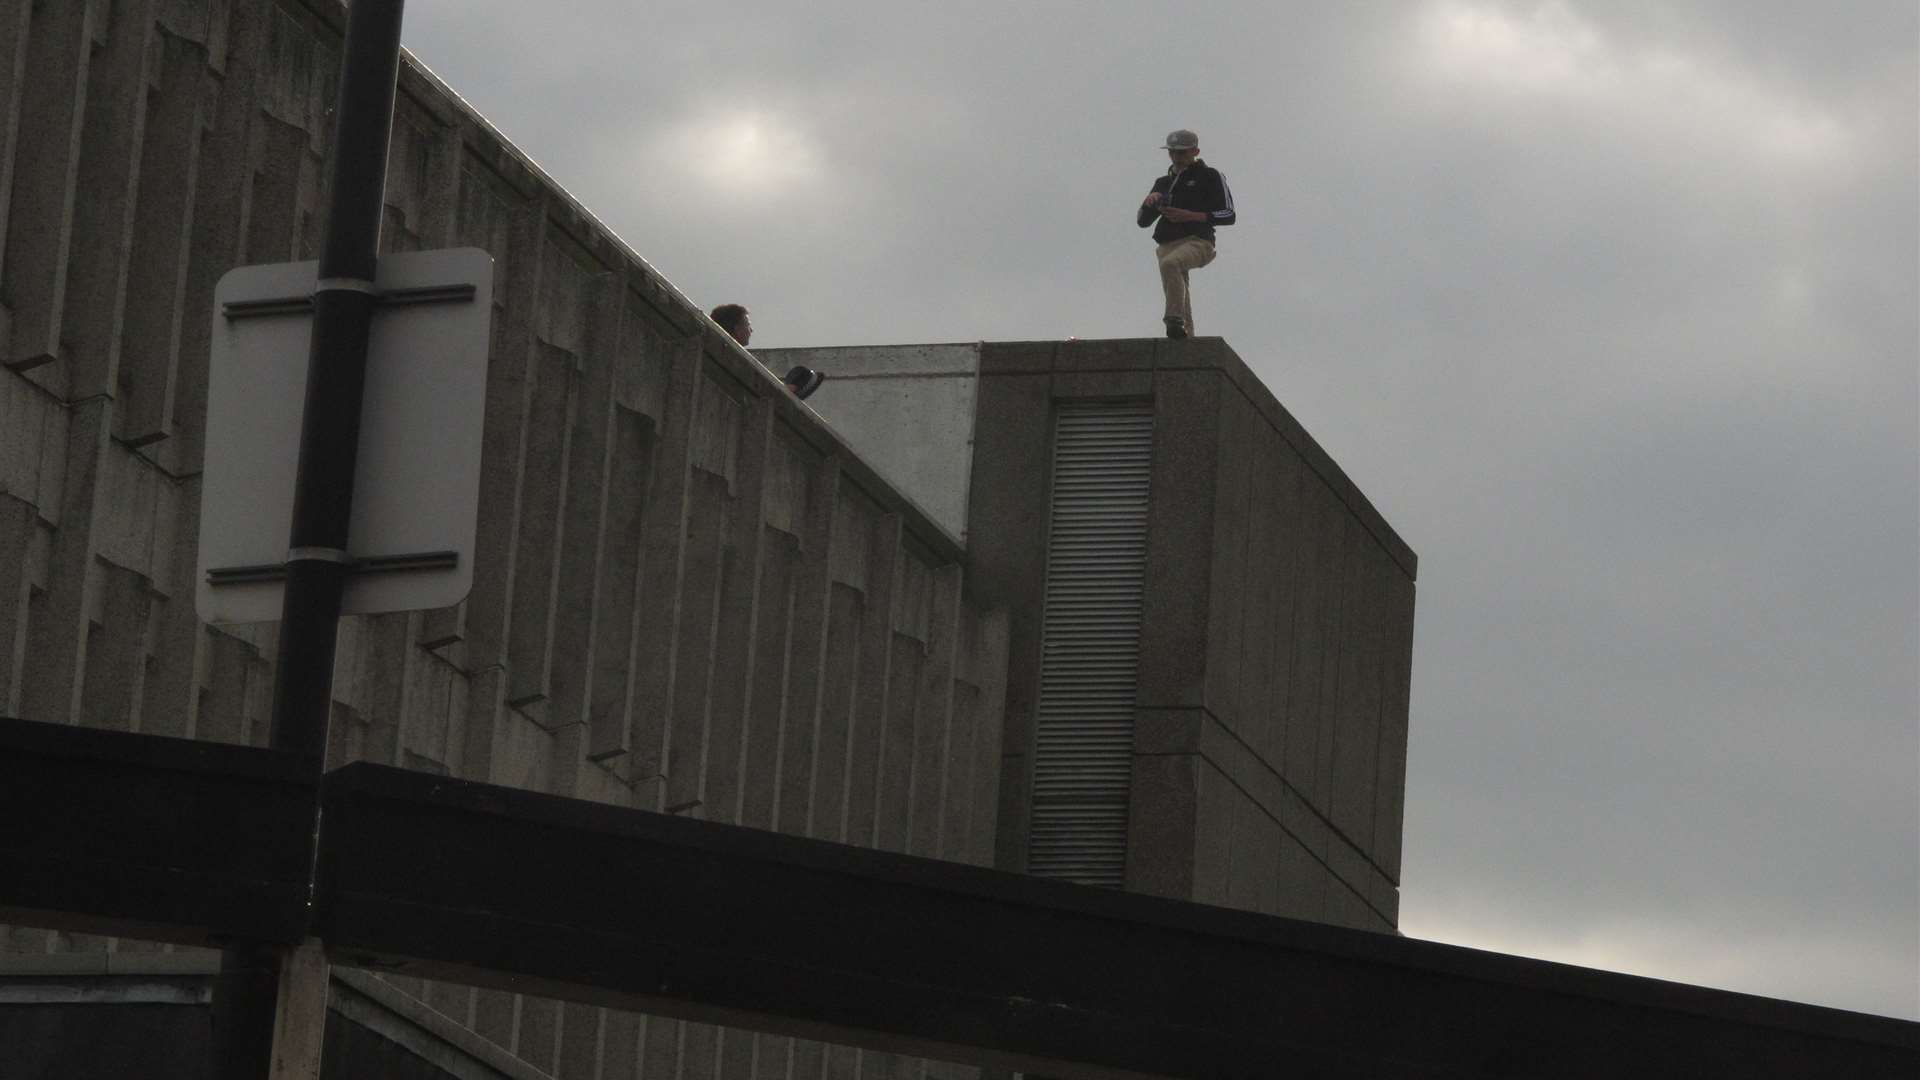 Officers are talking to the man who is on the roof or a multi-storey carpark